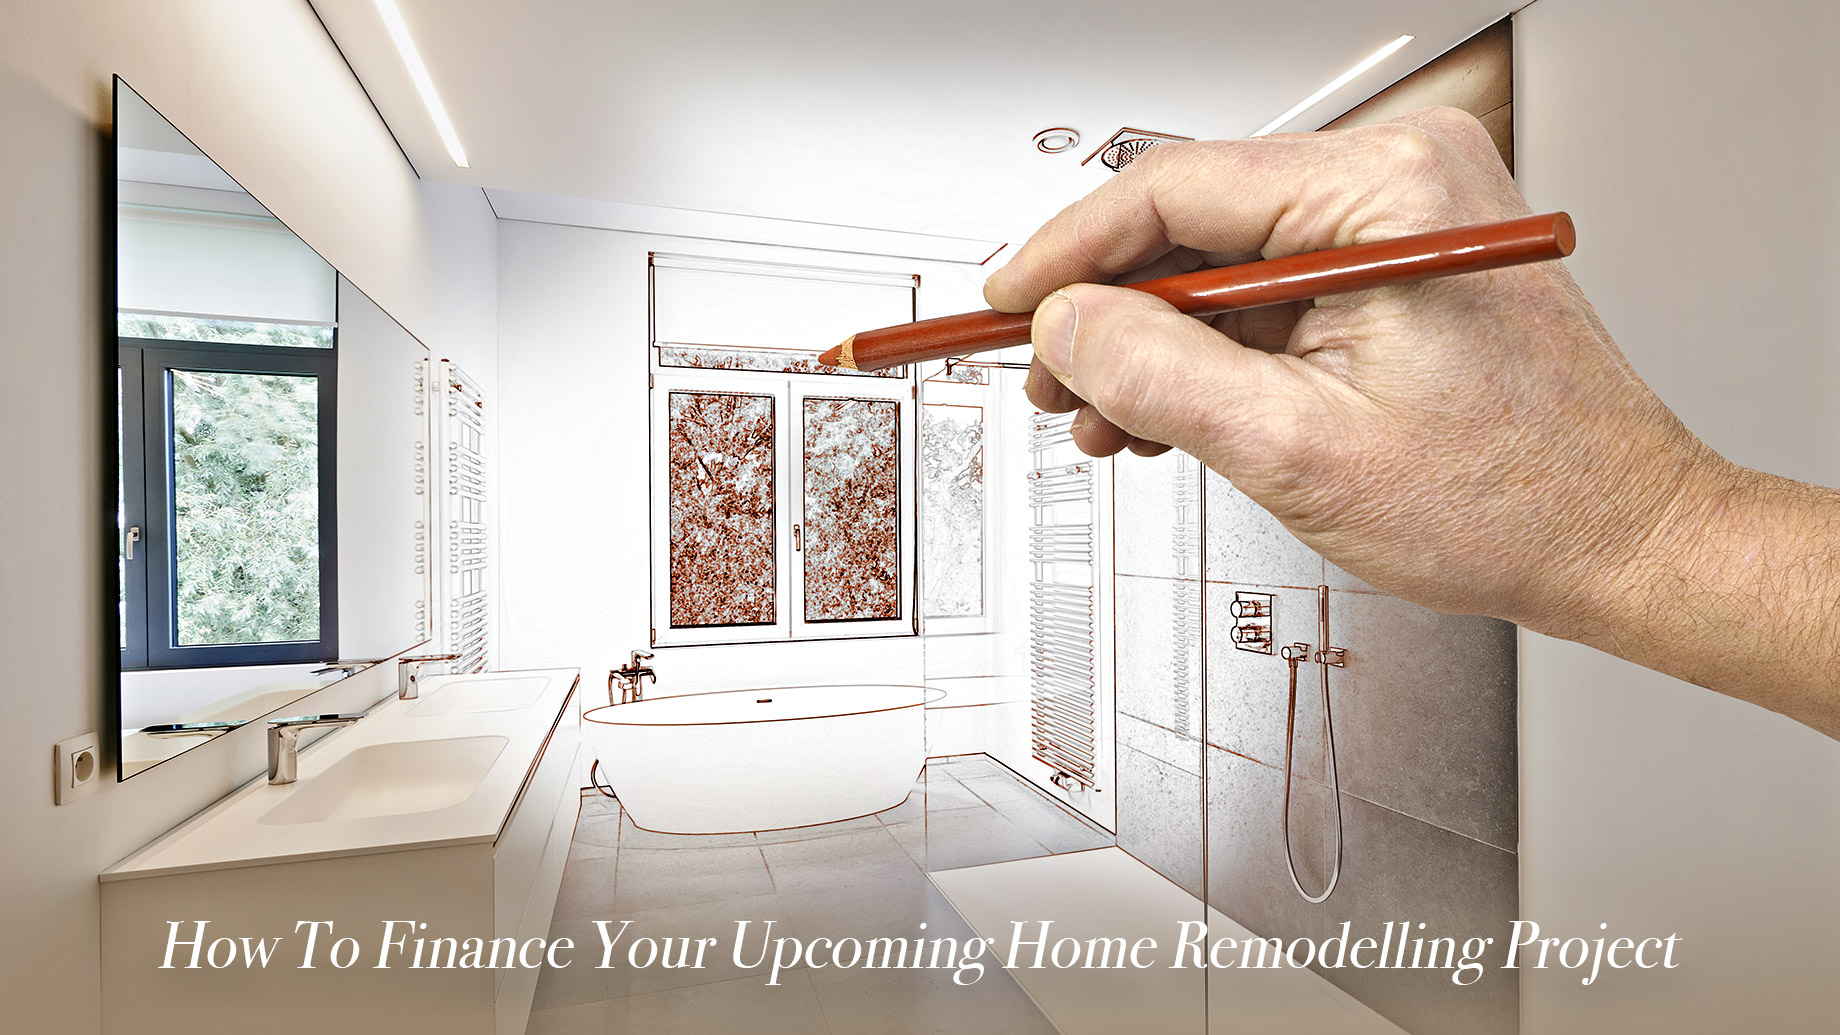 How To Finance Your Upcoming Home Remodelling Project